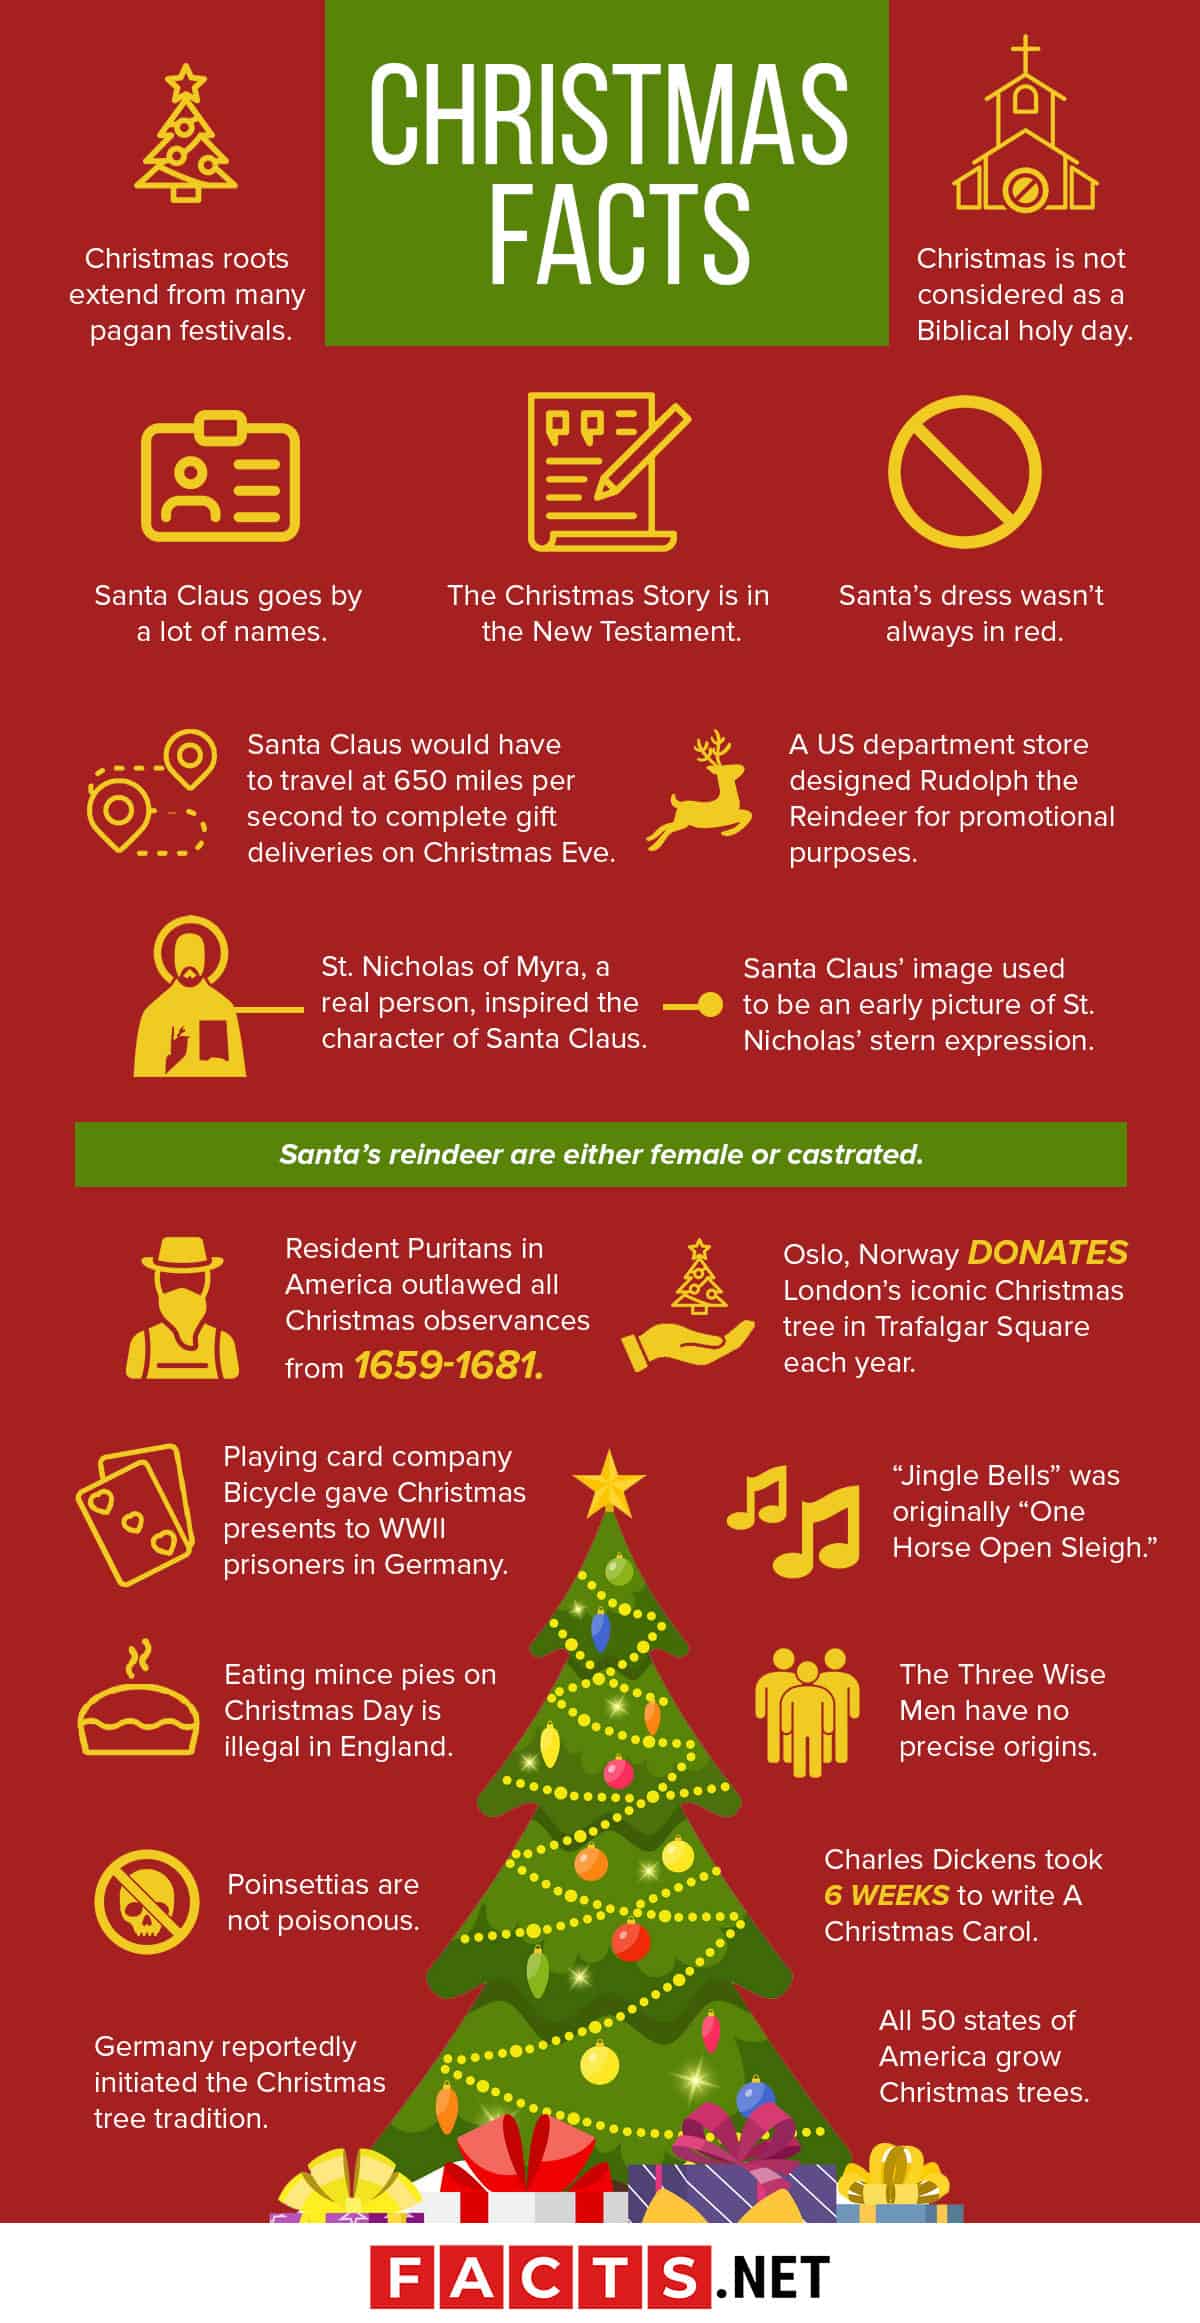 100-festive-facts-about-christmas-you-definitely-want-to-know-facts